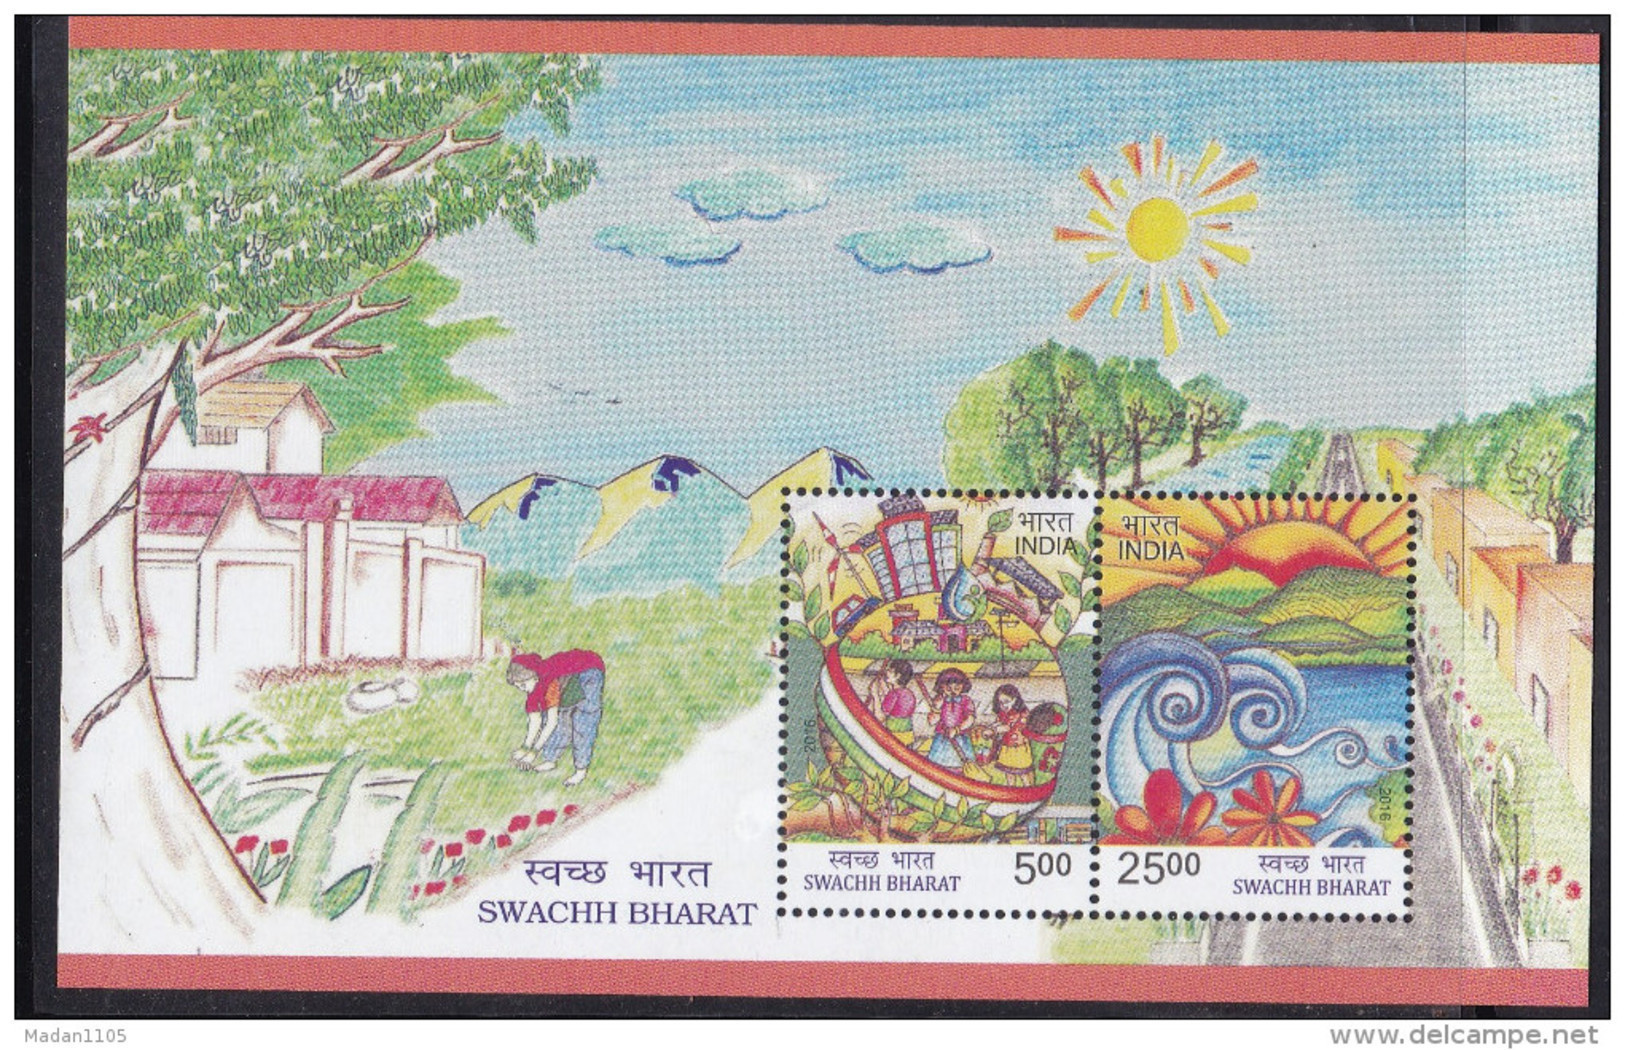 INDIA, 2016, Swachh Bharat,  Cleanliness Drive-Environment, India,, Children, Boat, Miniature Sheet, MNH, (**) - Nuovi